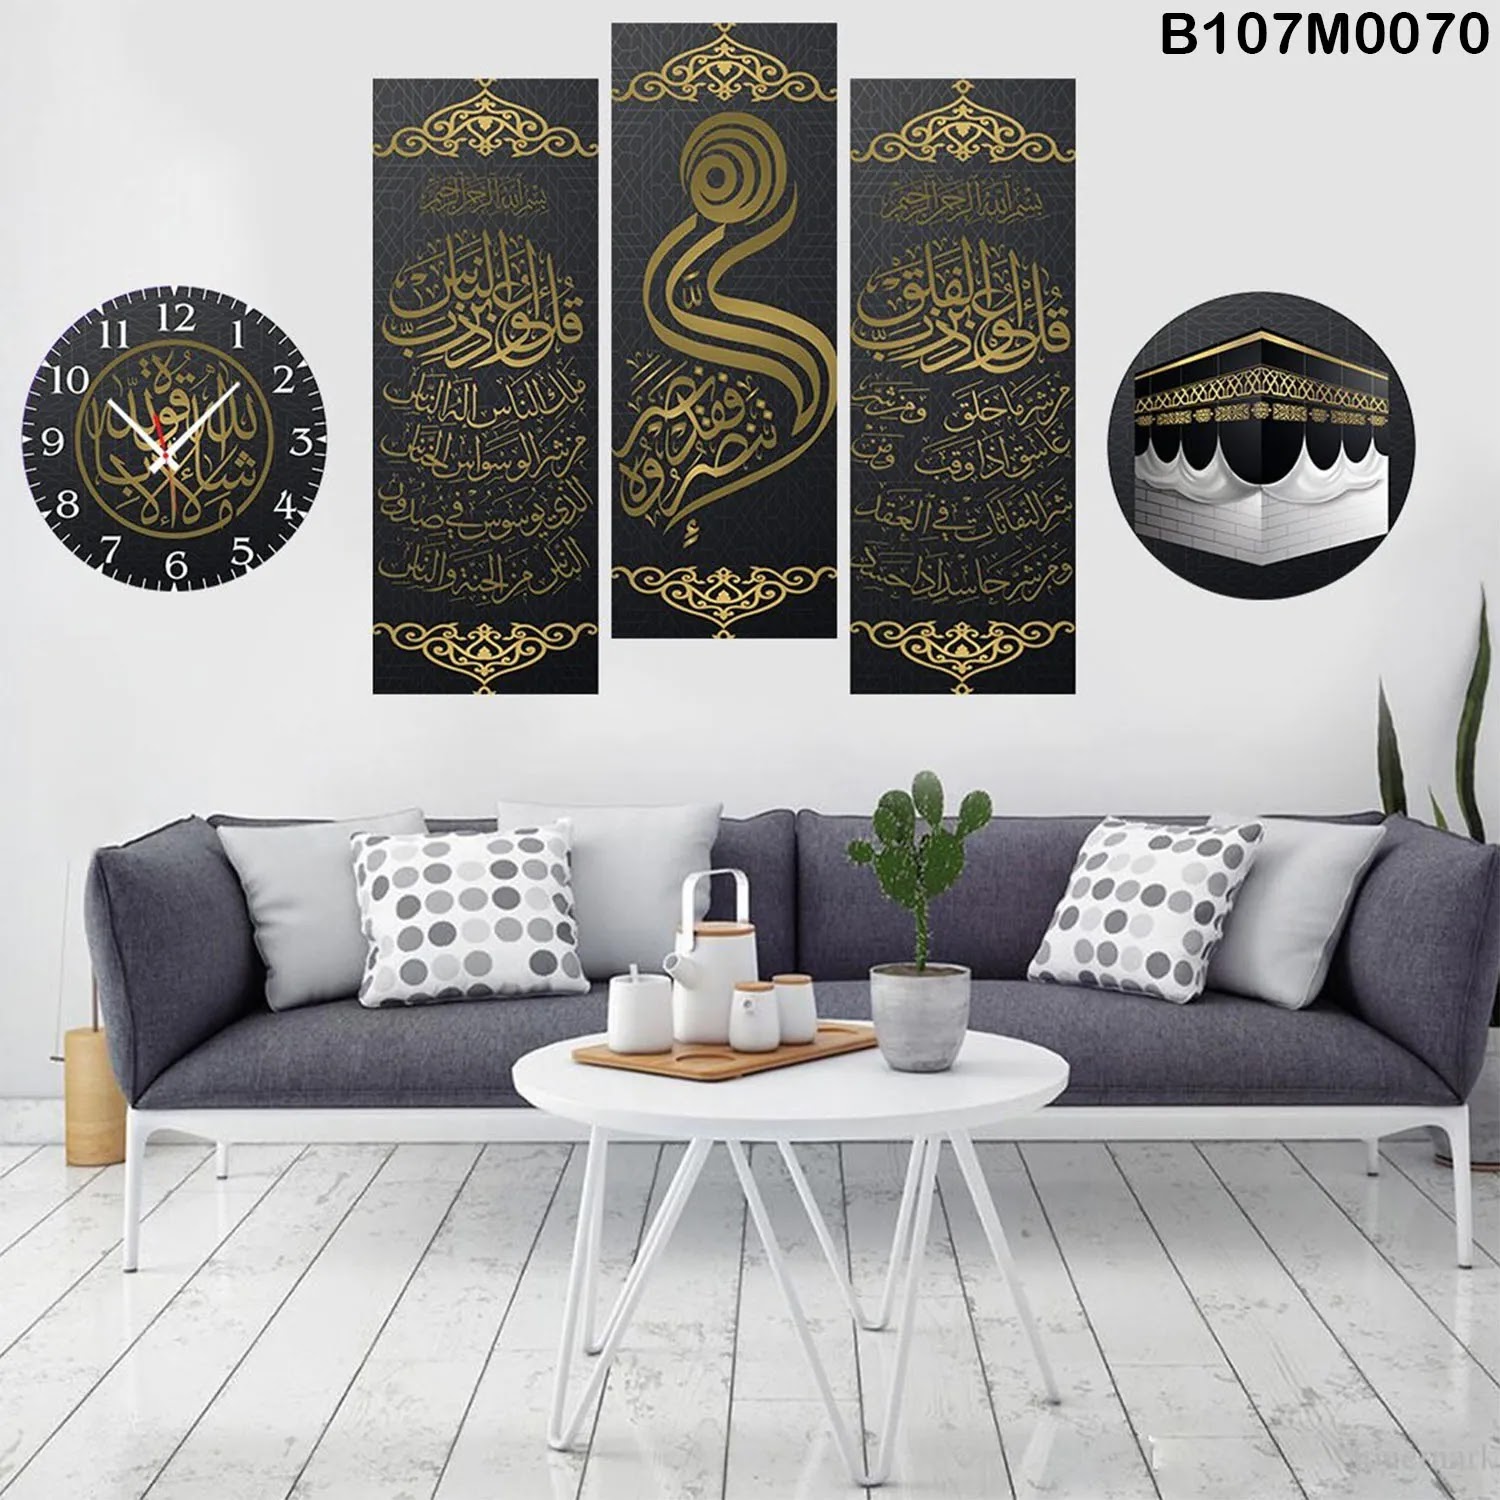 Black & Gold Triptych, clock and a circle with Quran & (Allah - Mohammad)